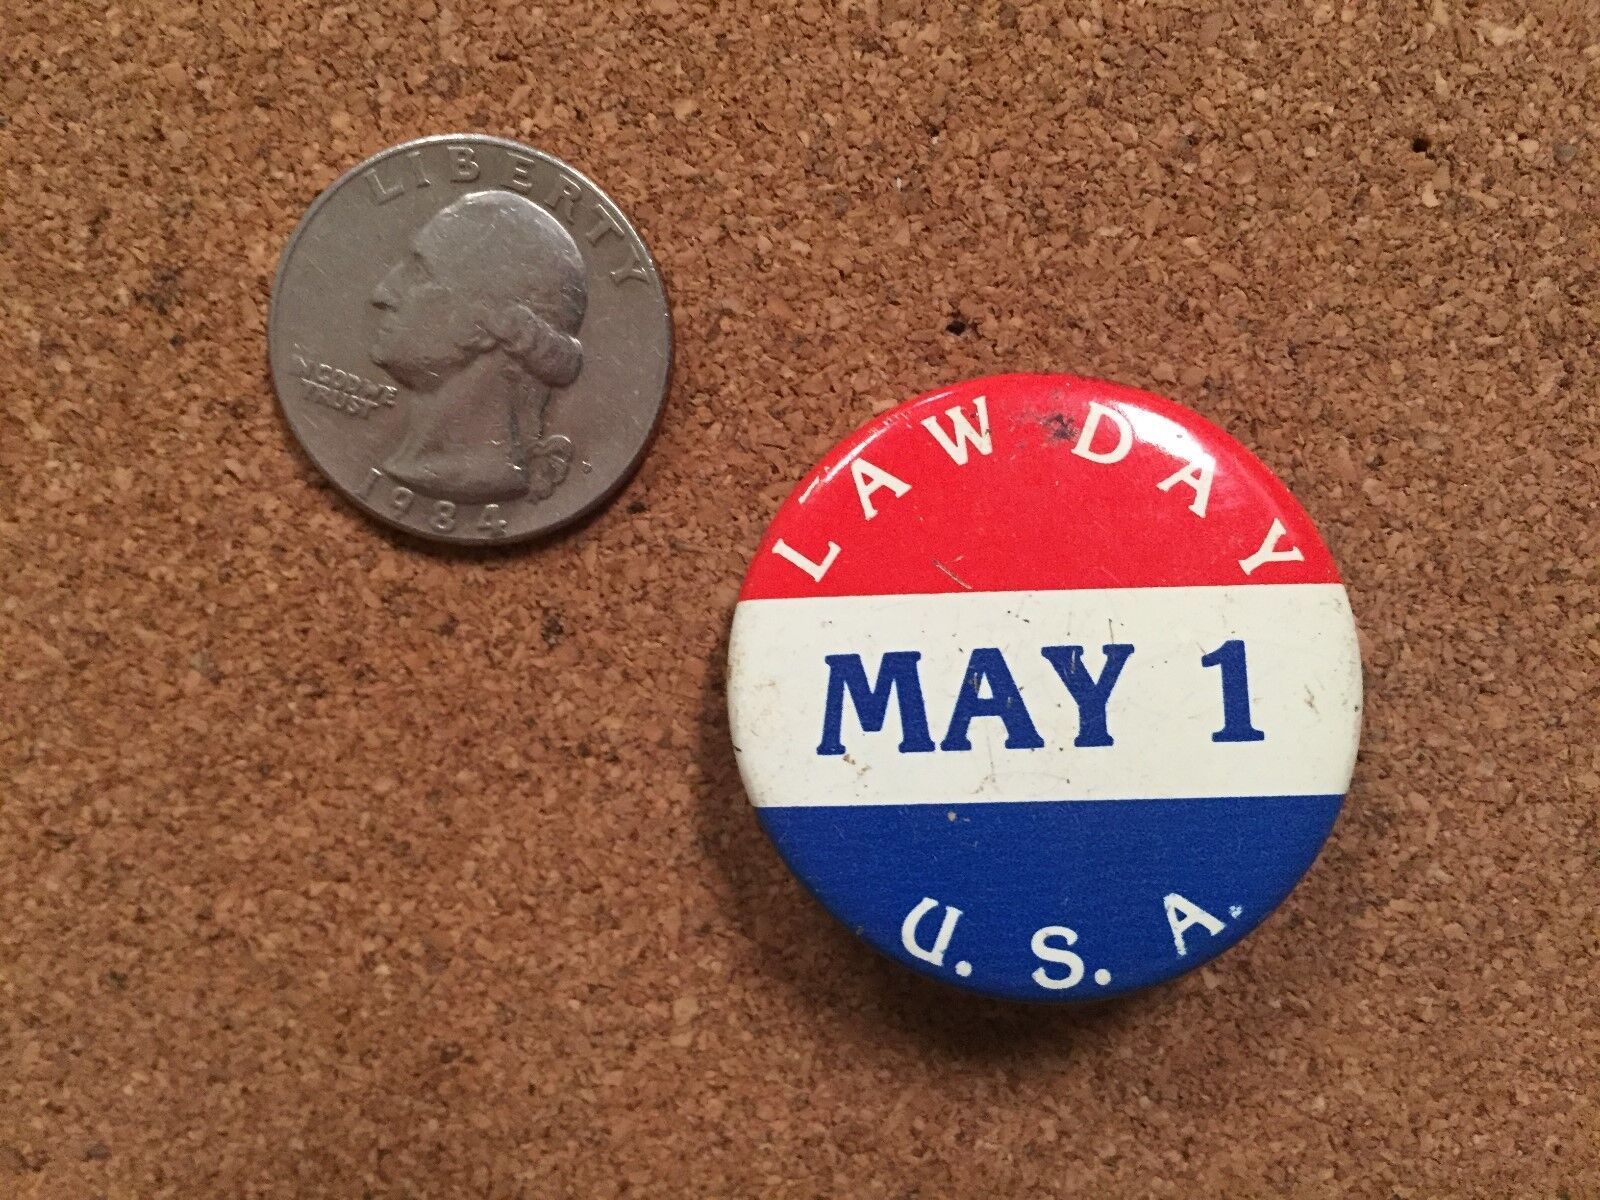 VINTAGE LAW DAY May 1 U.S.A. Pinback Button